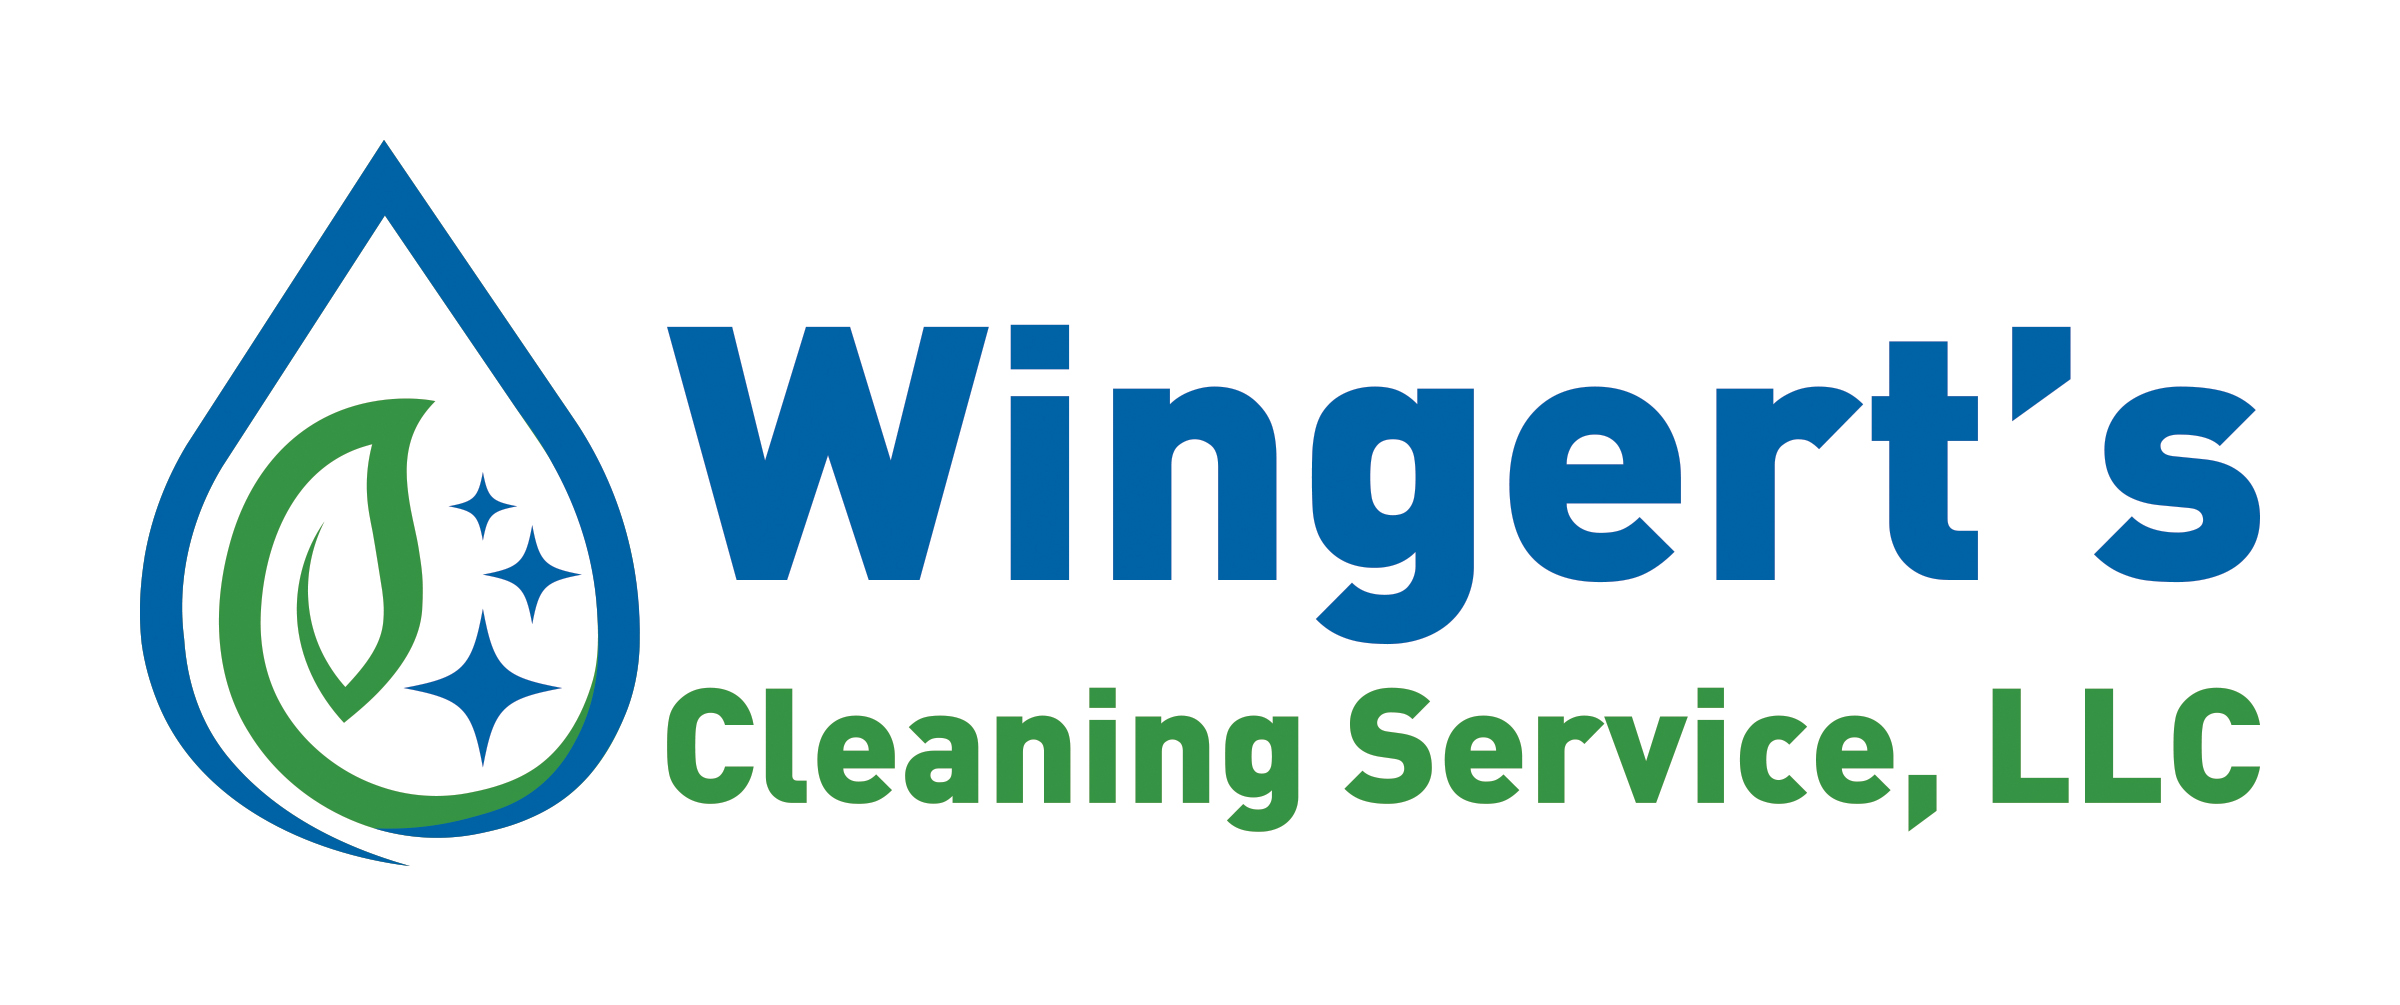 Wingert's Cleaning Service Logo